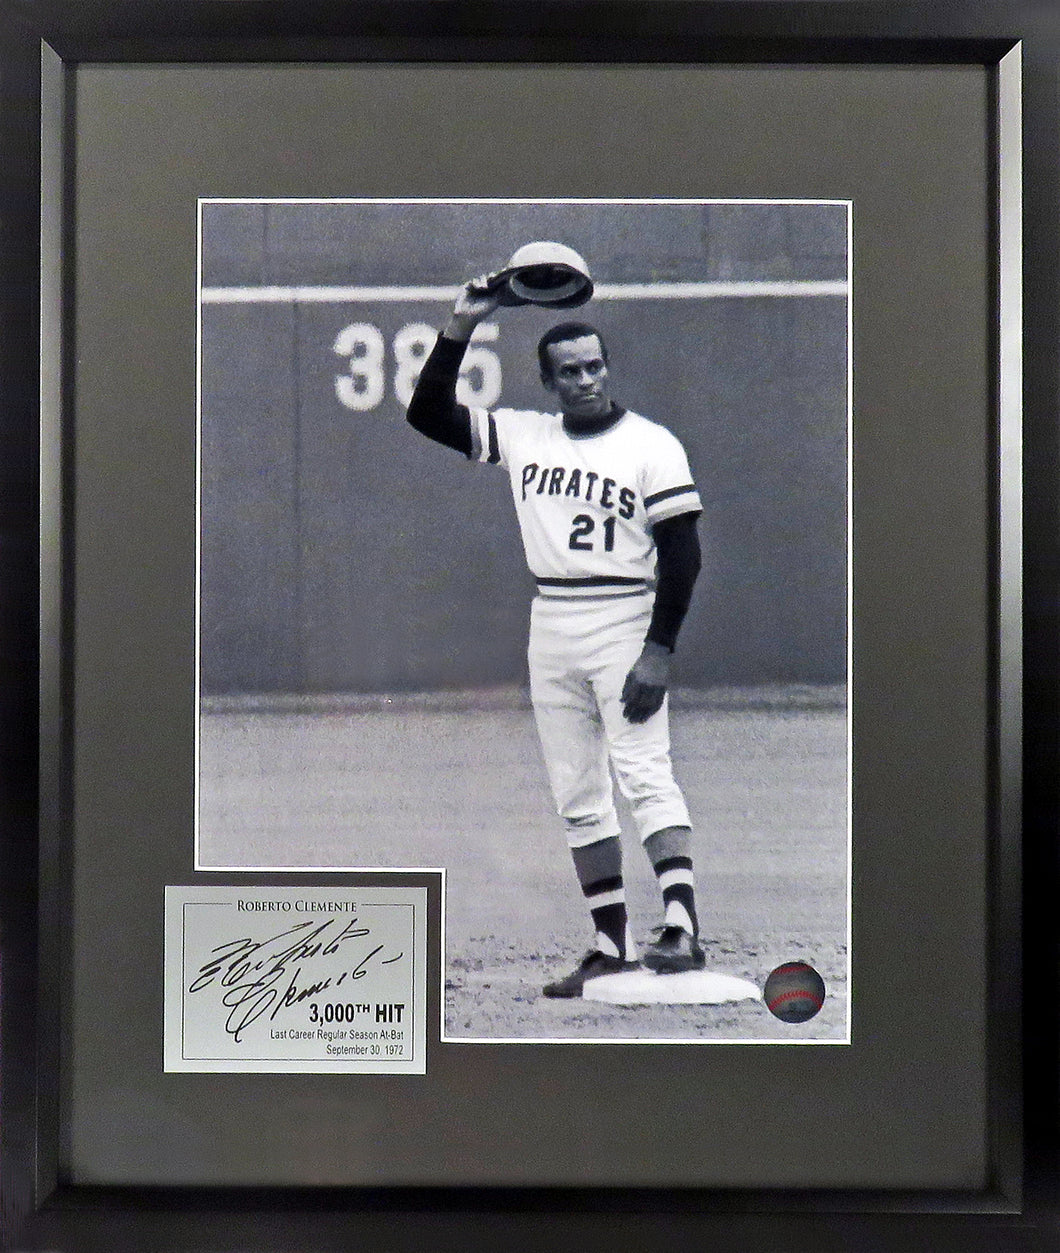 Pittsburgh Pirates Roberto Clemente “3,000 Hit” Framed Photo (Engraved Series)